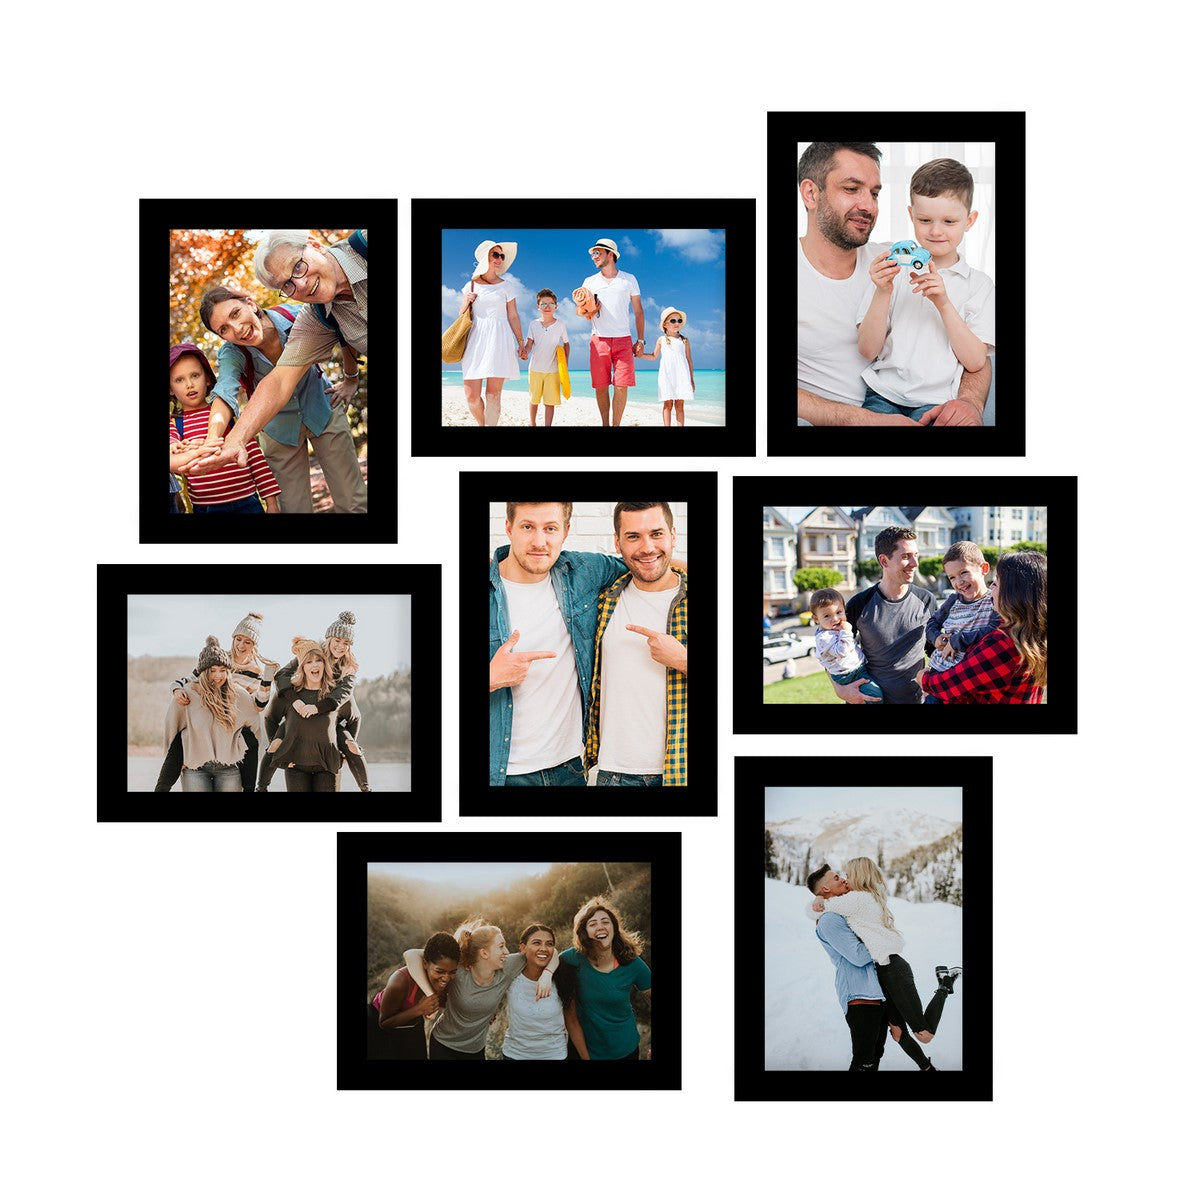 Memory Wall Collage Photo Frame - Set of 8 Photo Frames for 8 Photos of 6"x8"